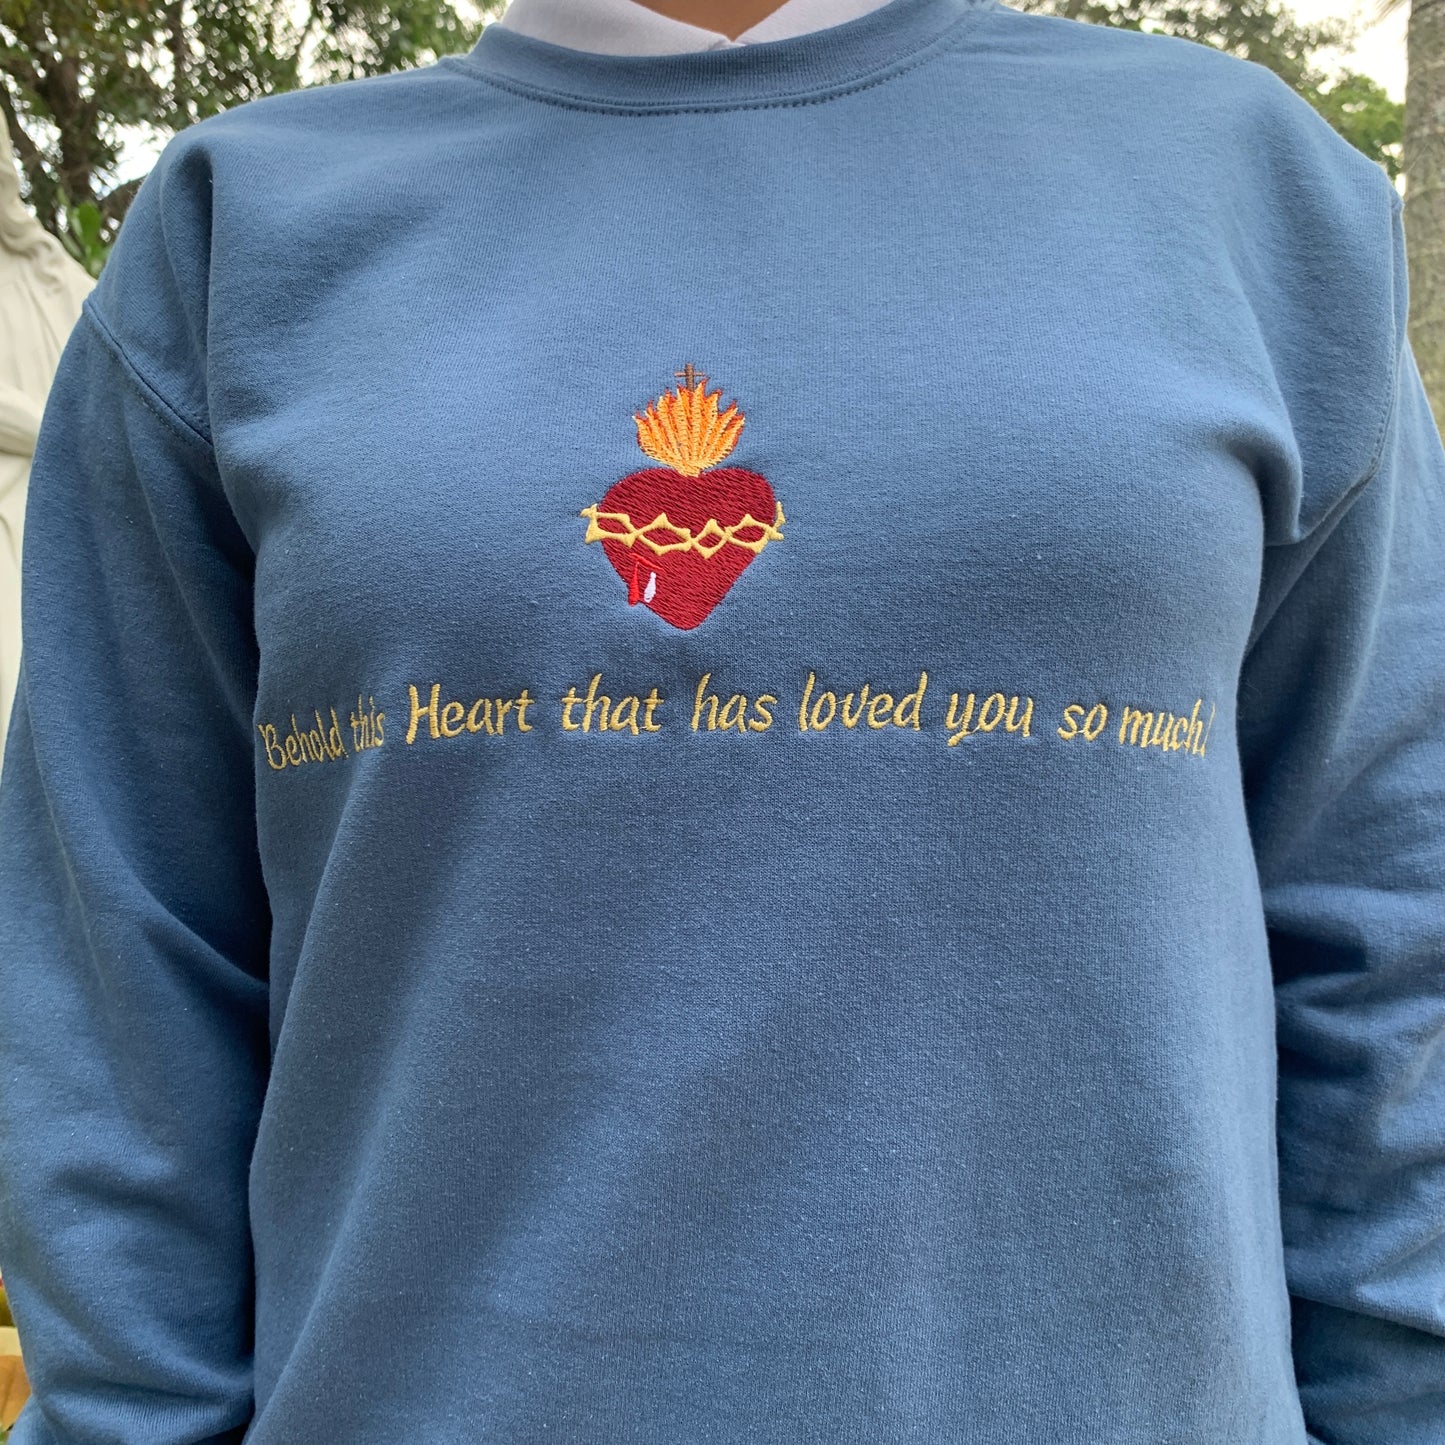 "Behold This Heart" Embroidered Sacred Heart of Jesus Crewneck Sweater by SCTJM